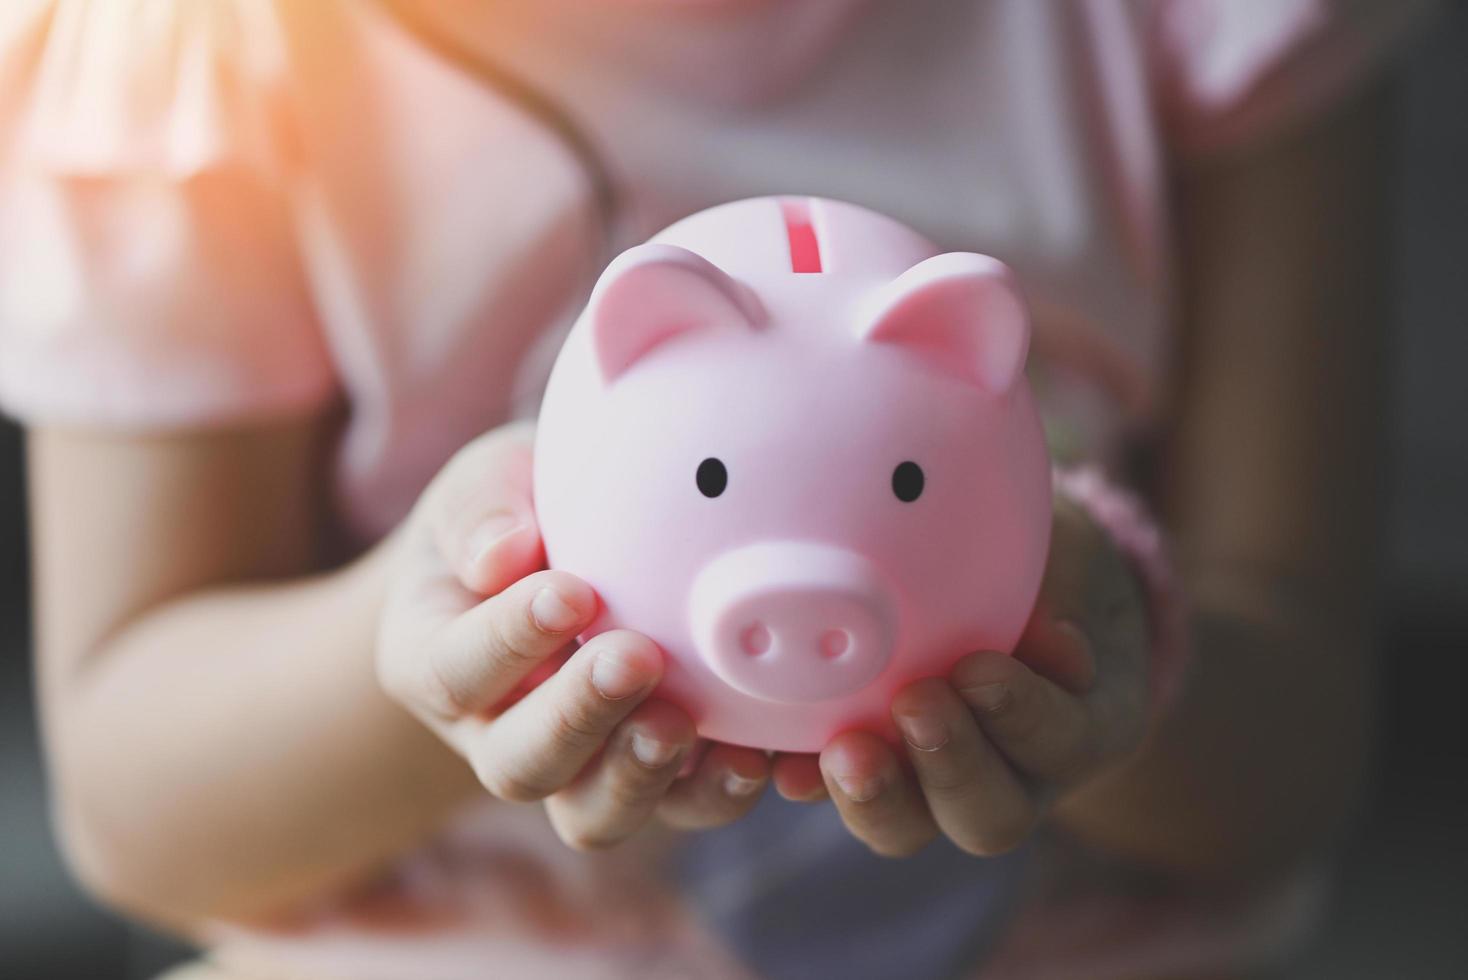 Child woman hand hold pink piggy bank for saving money for education study or investment , Save money concept, daughter hands holding pink piggy bank photo